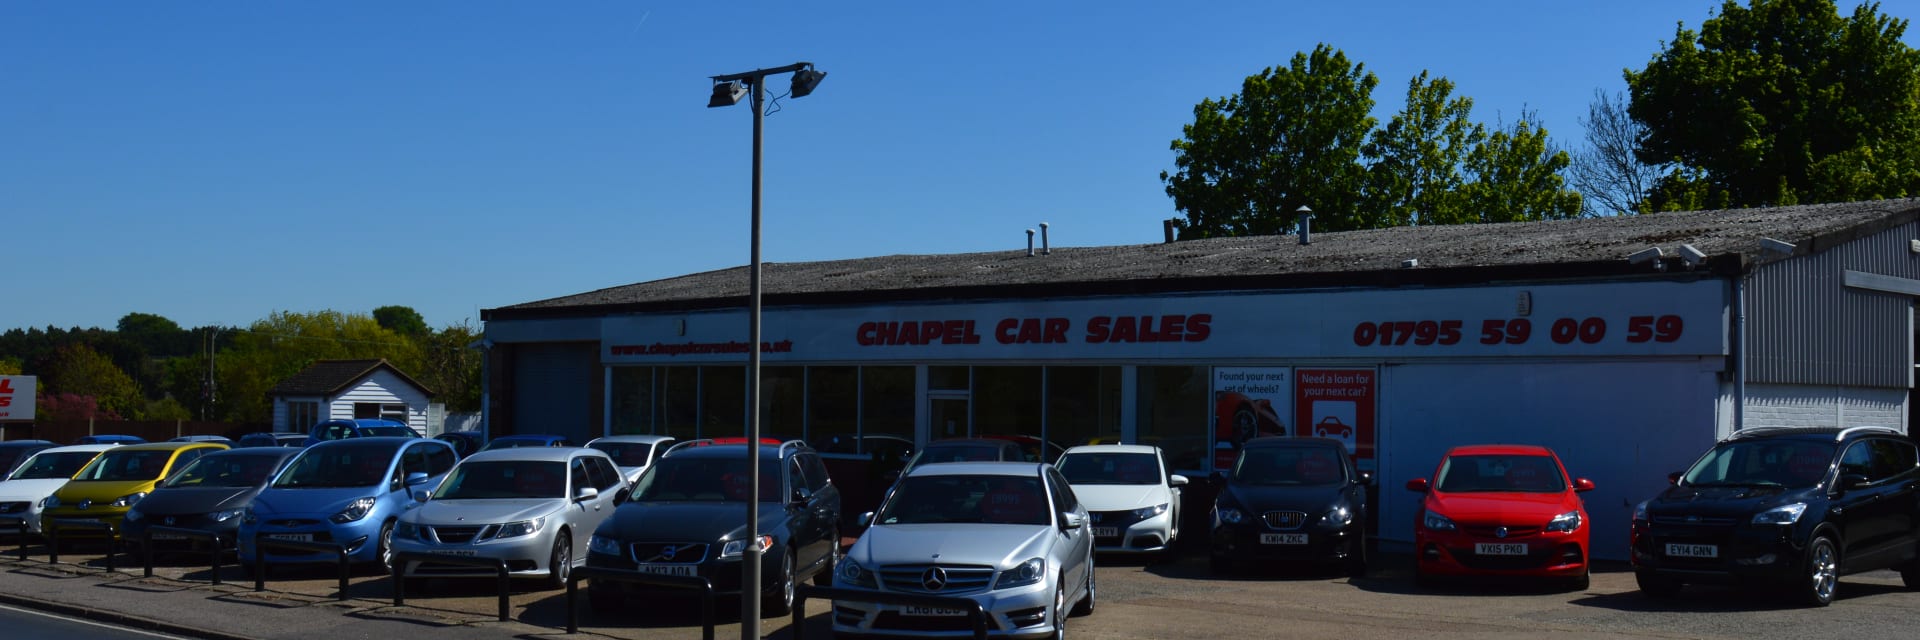 Welcome to Chapel Car Sales